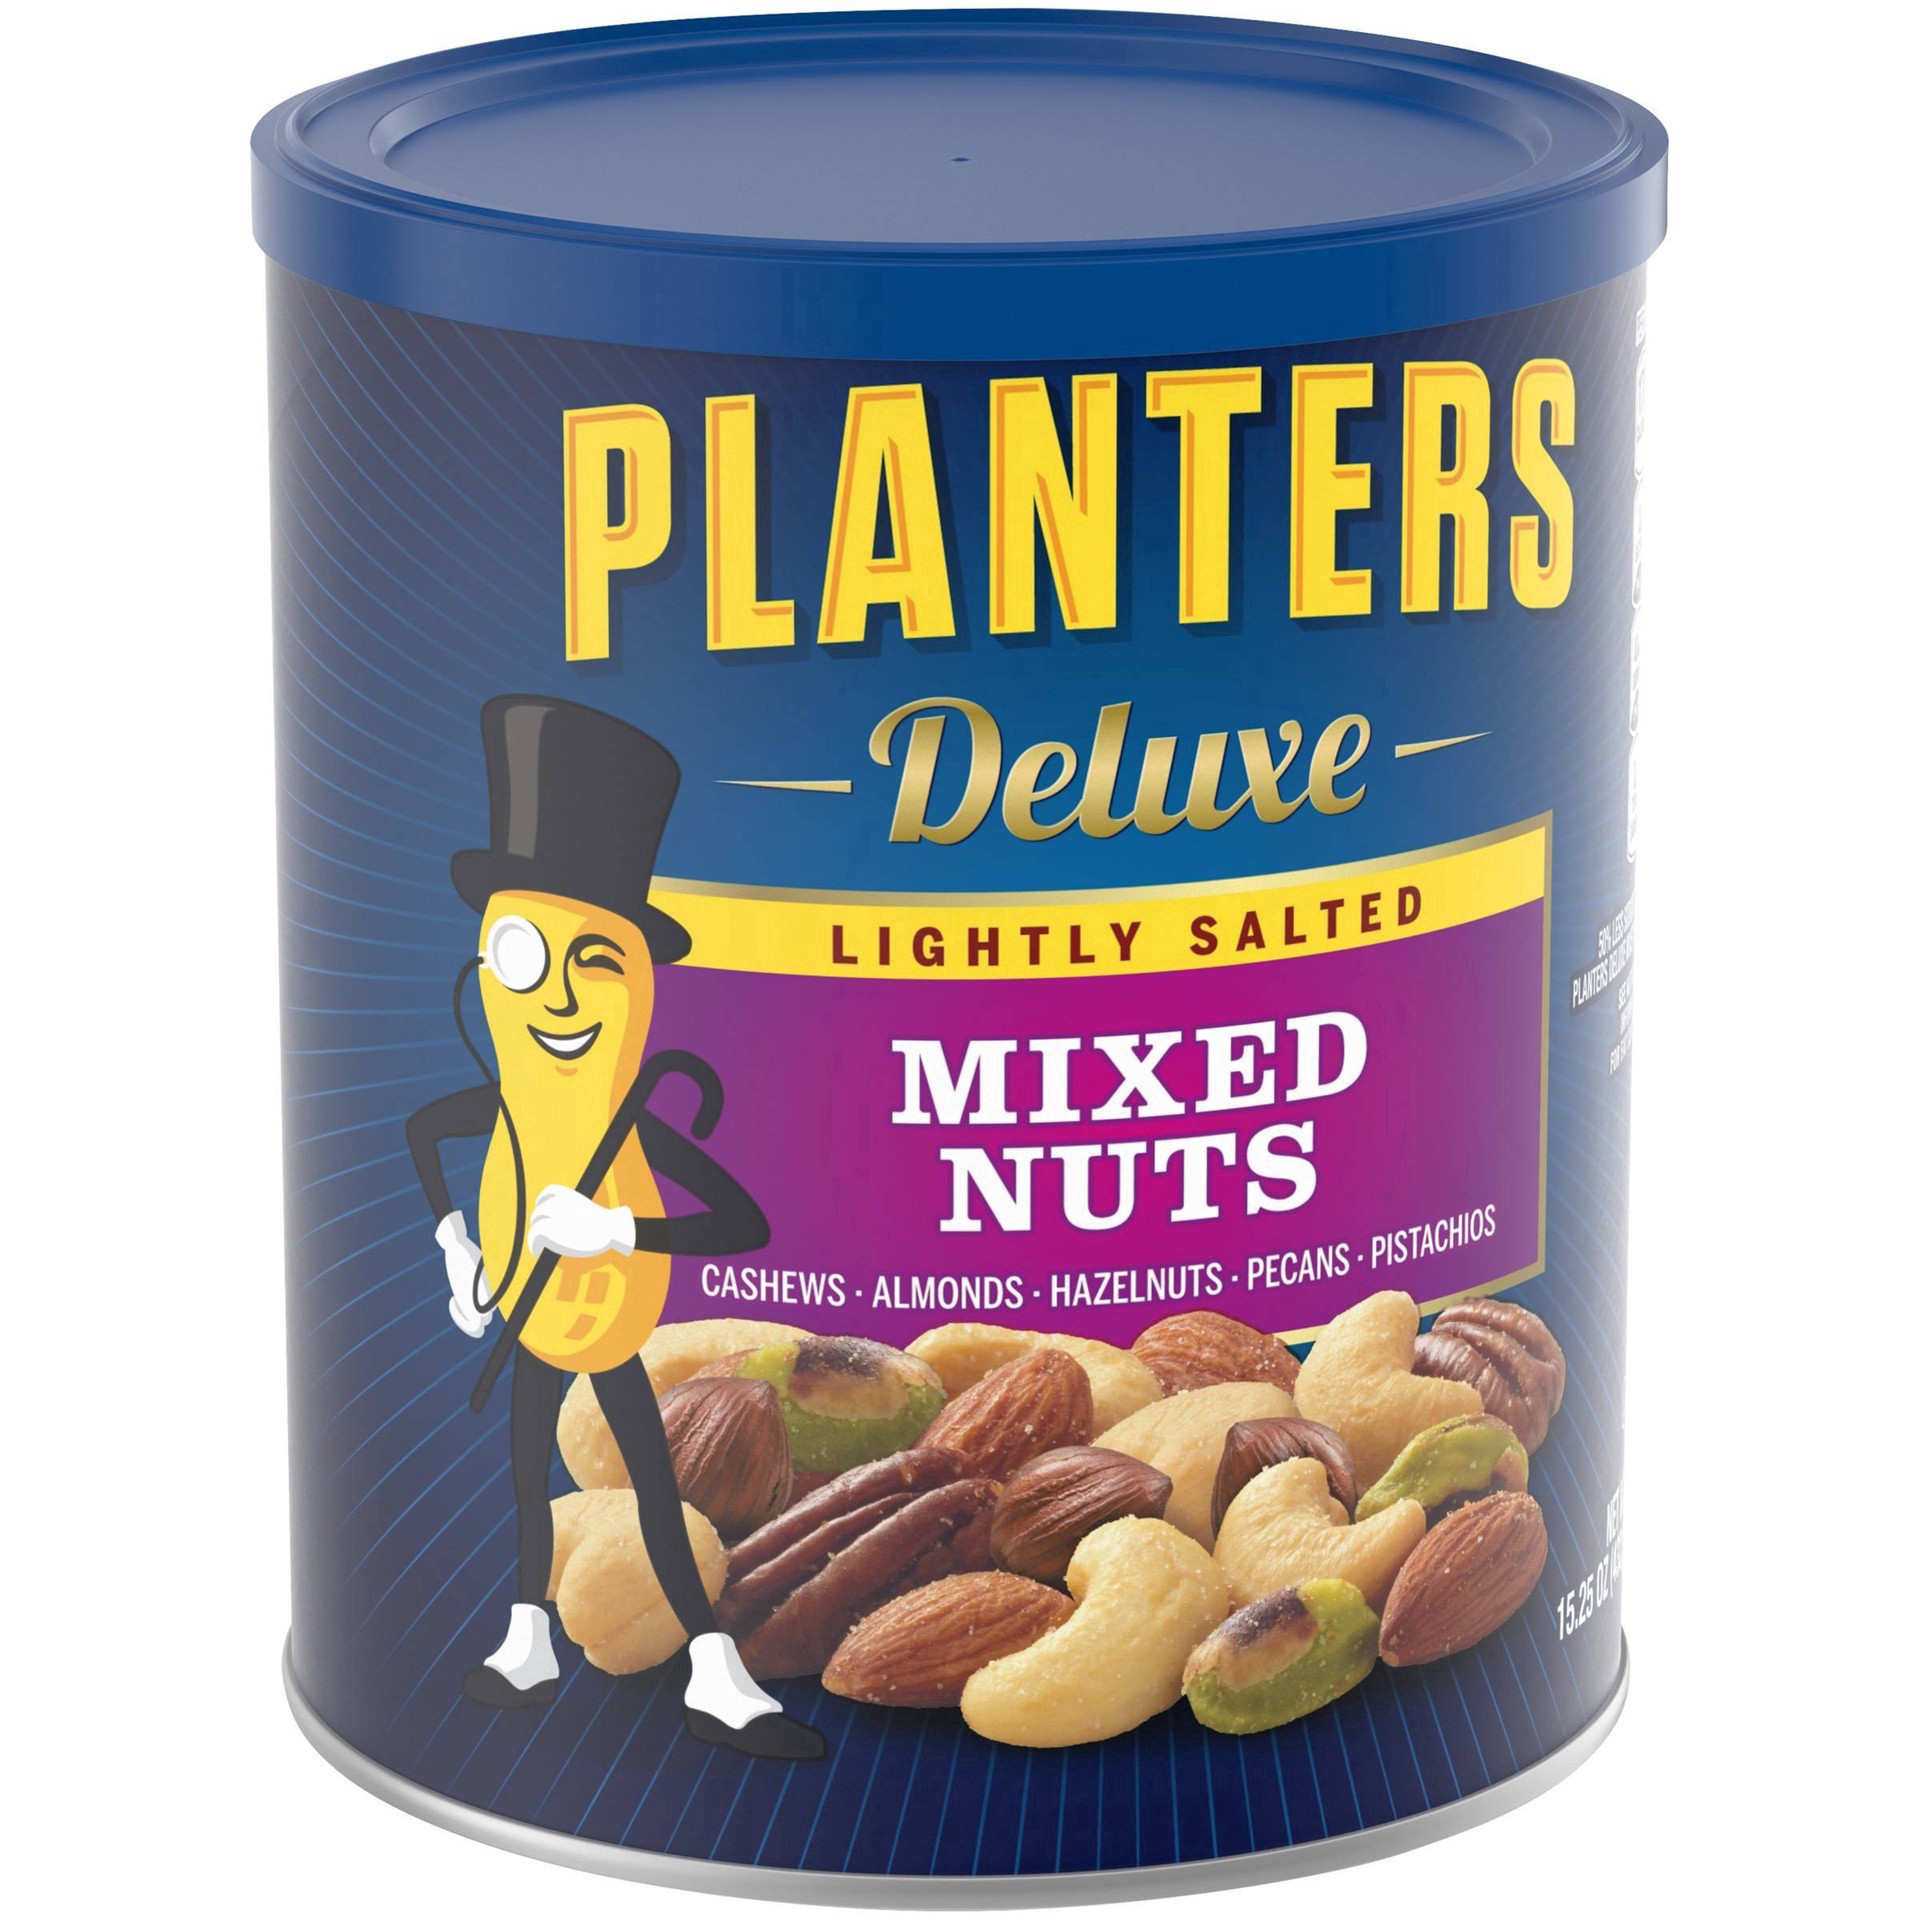 slide 13 of 46, Planters Deluxe Lightly Salted Mixed Nuts 15.25 oz, 15.25 oz